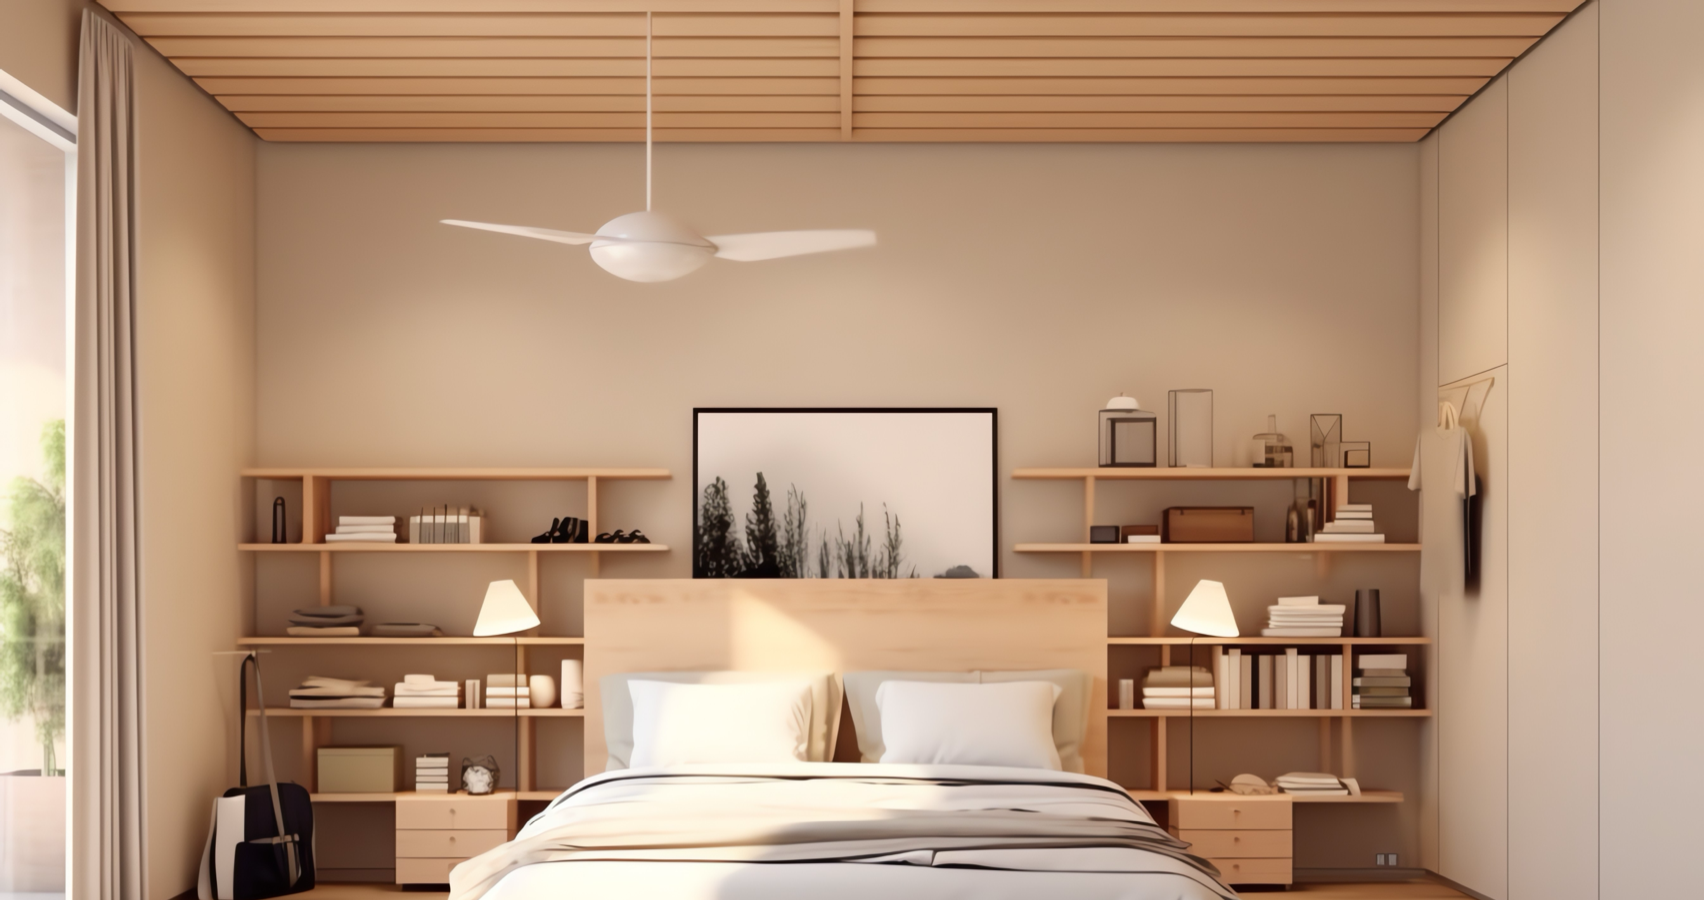 Choosing the Perfect Ceiling Fan: Size and Blade Count Matters